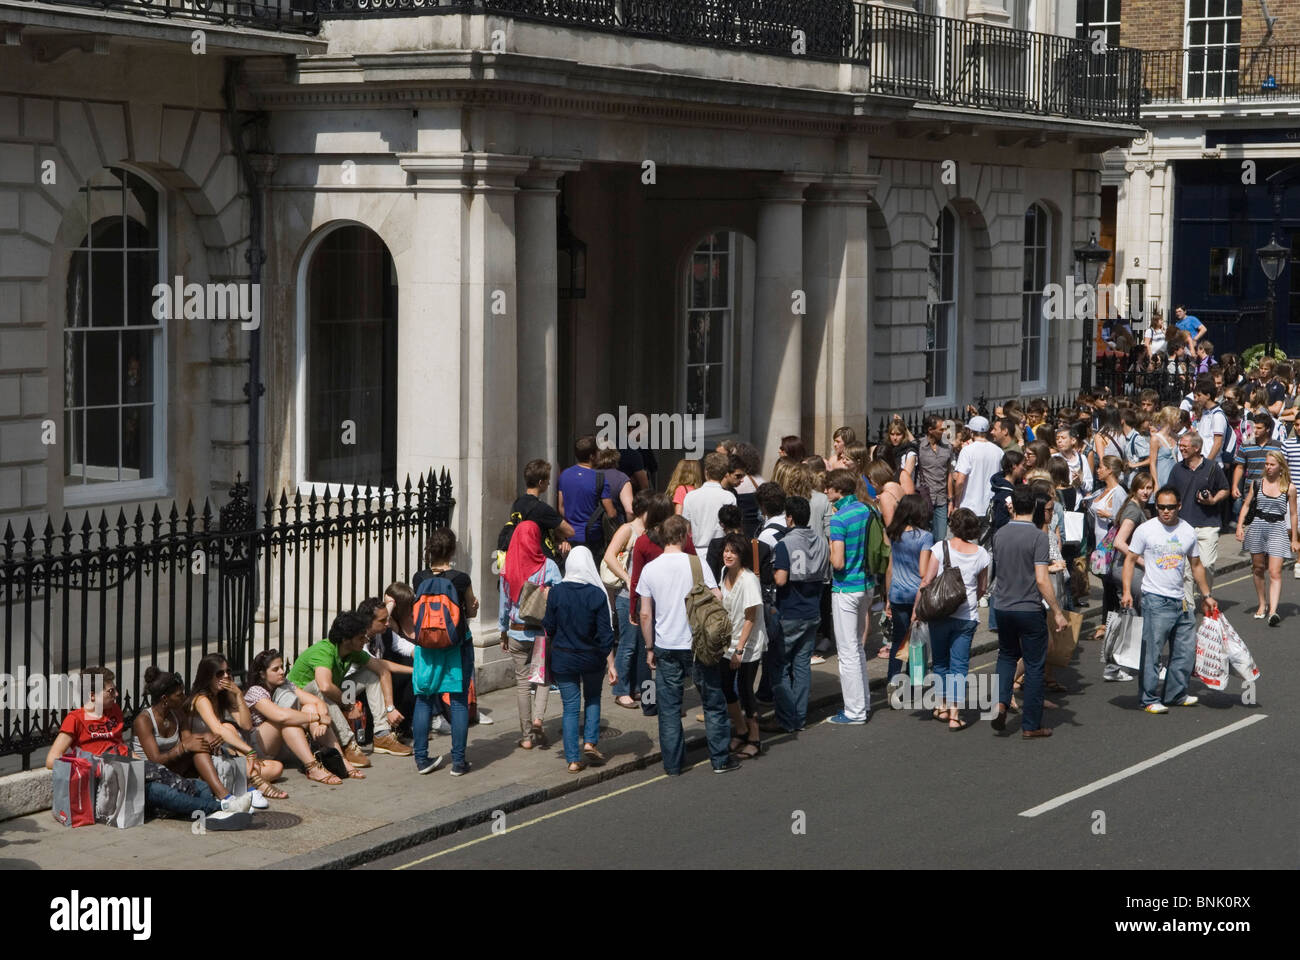 Abercrombie & Fitch Burlington Gardens London lifestyle clothing store.  Shoppers queue to enter the store. 2010s HOMER SYKES Stock Photo - Alamy